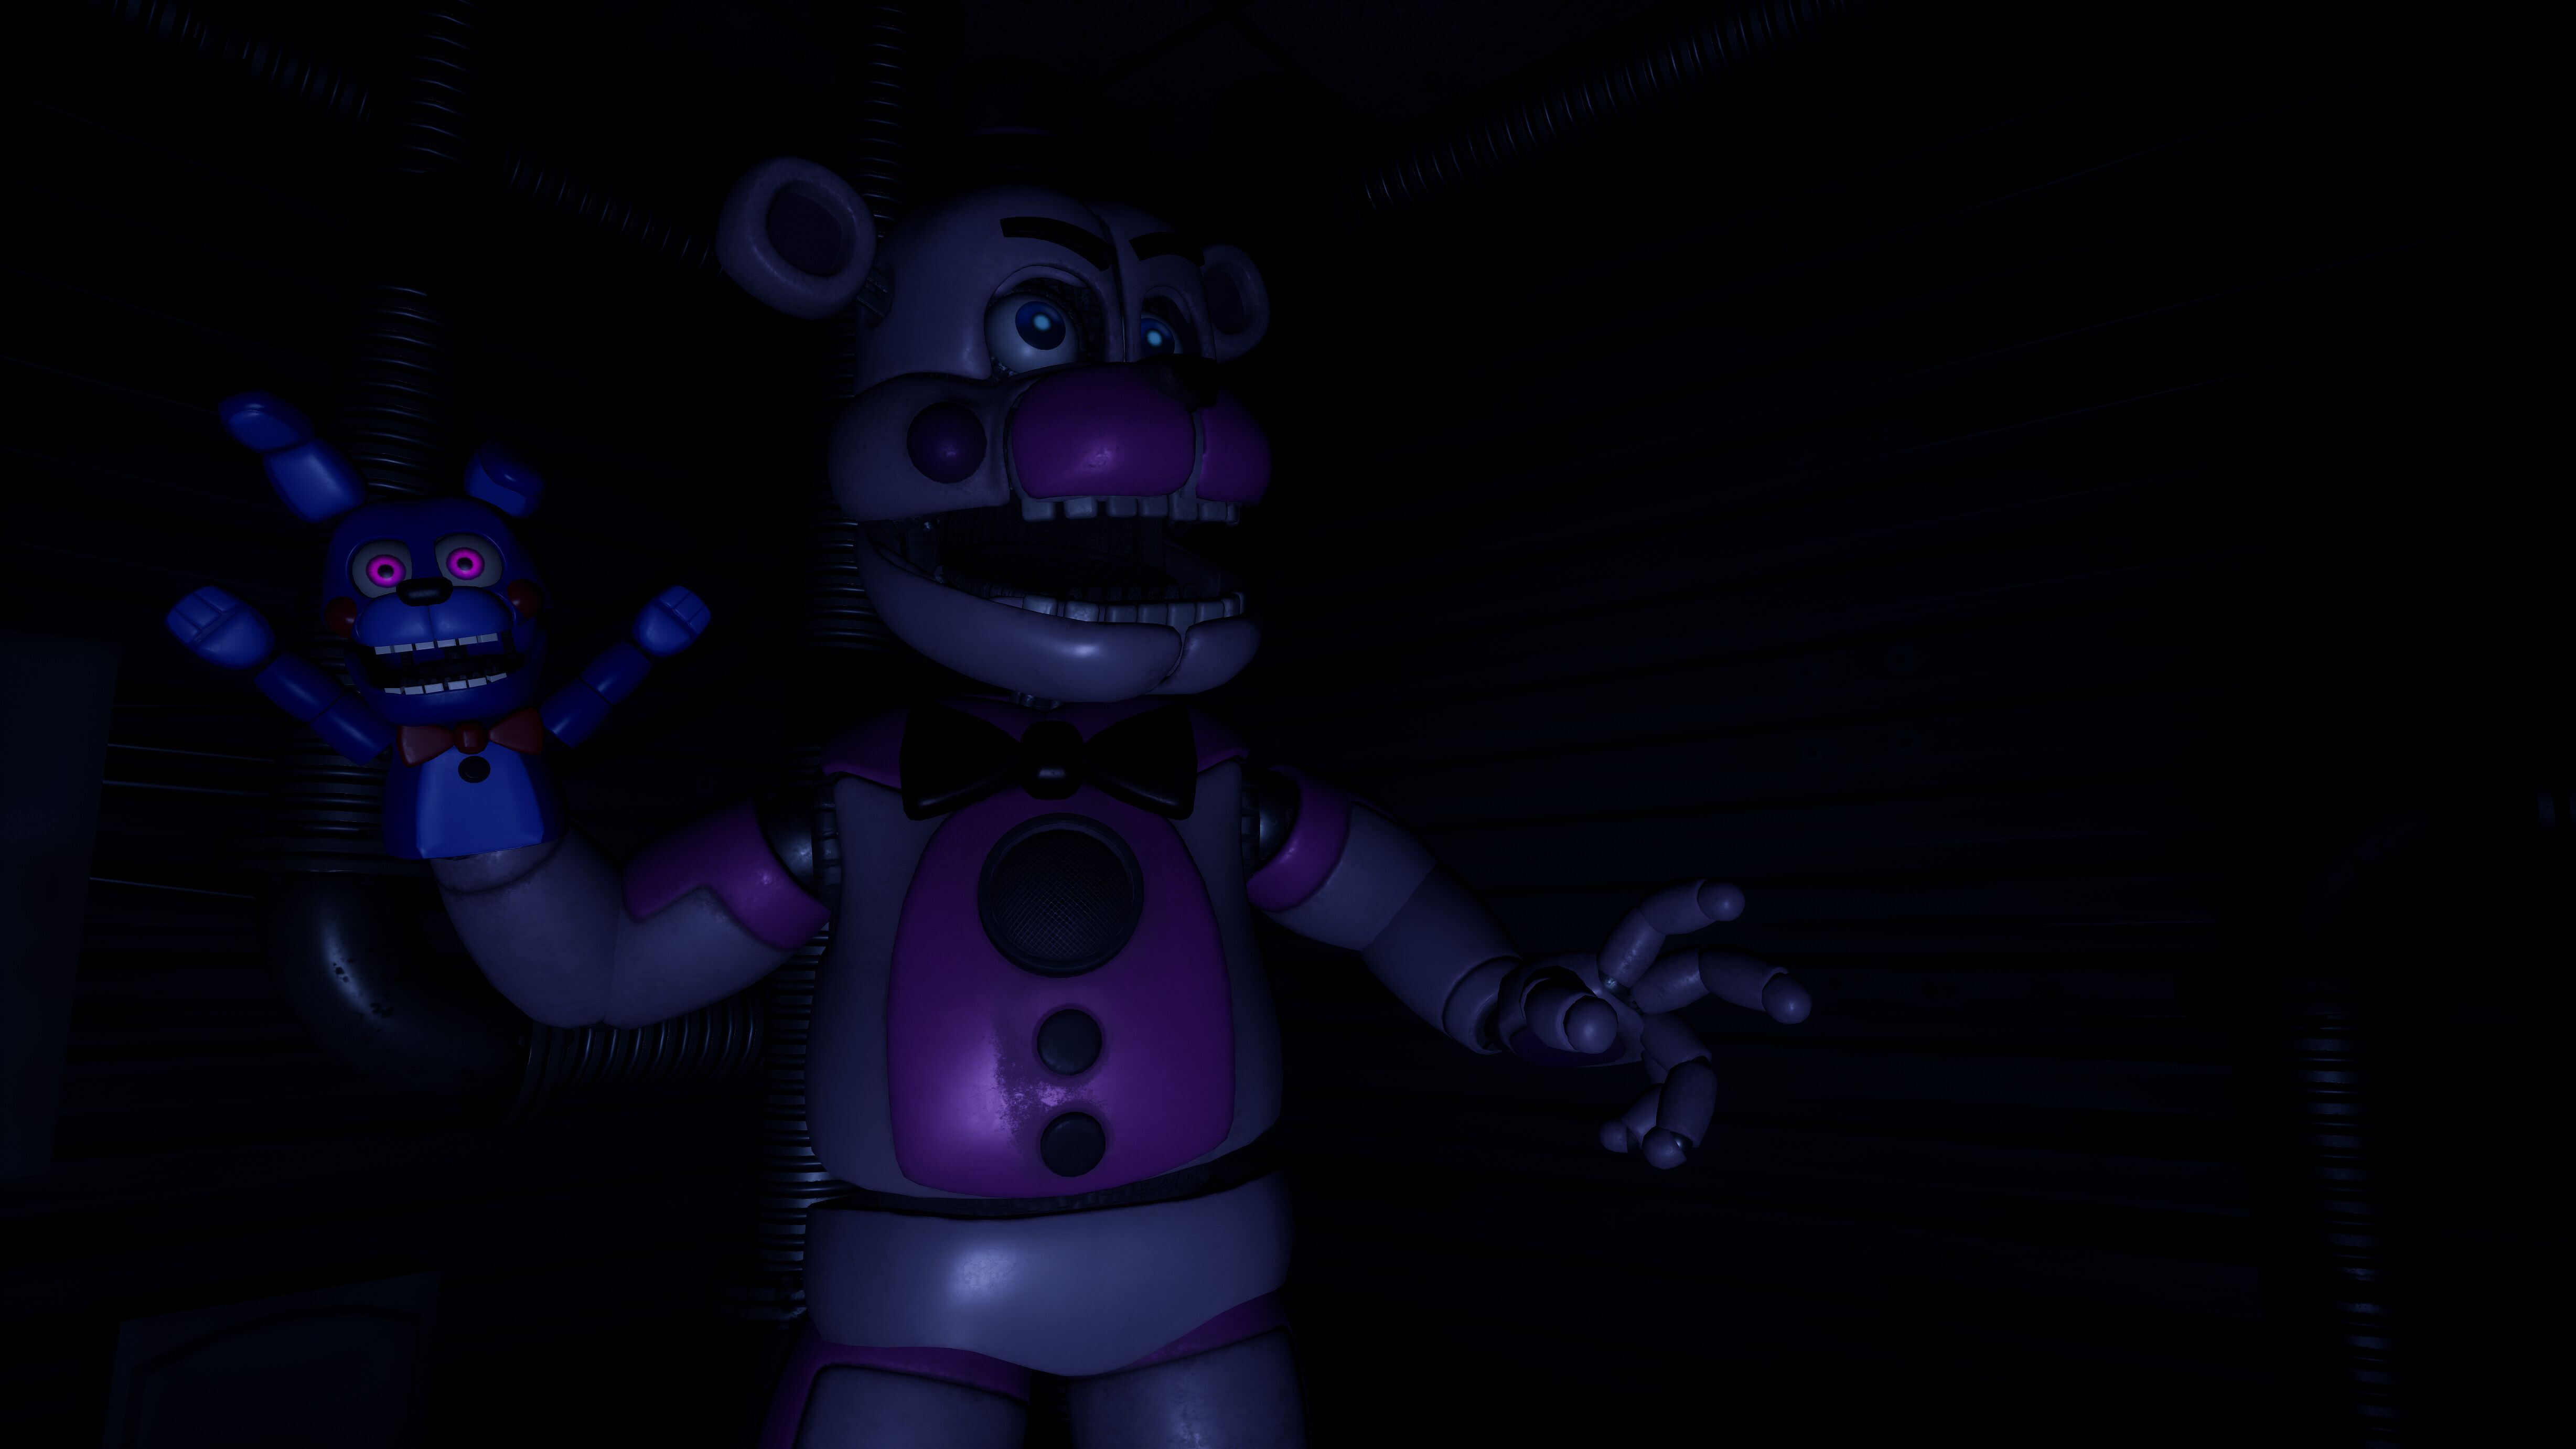 FNAF HELP WANTED 2 - NEW Trailer Five Nights at Freddy's VR 2 (2023) 